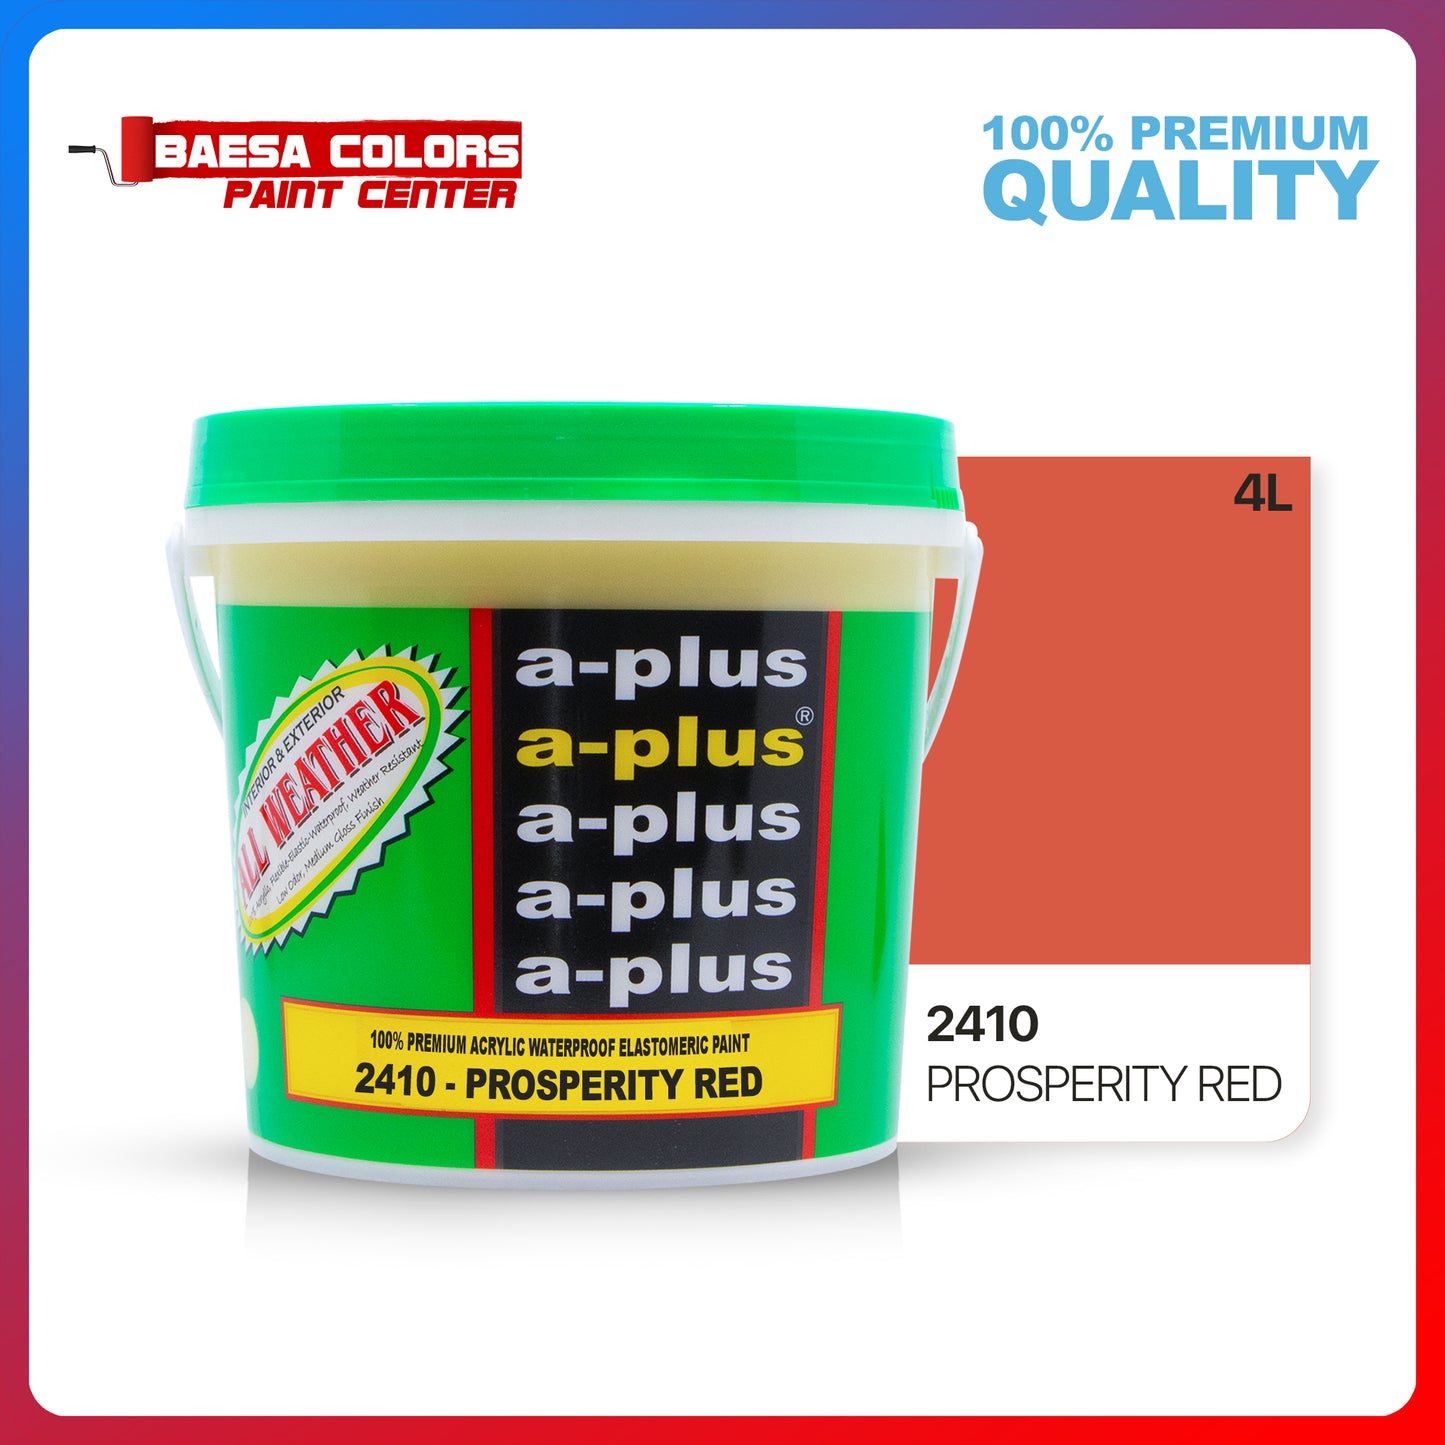 A-Plus All Weather® 2410 Prosperity Red Elastomeric Paint